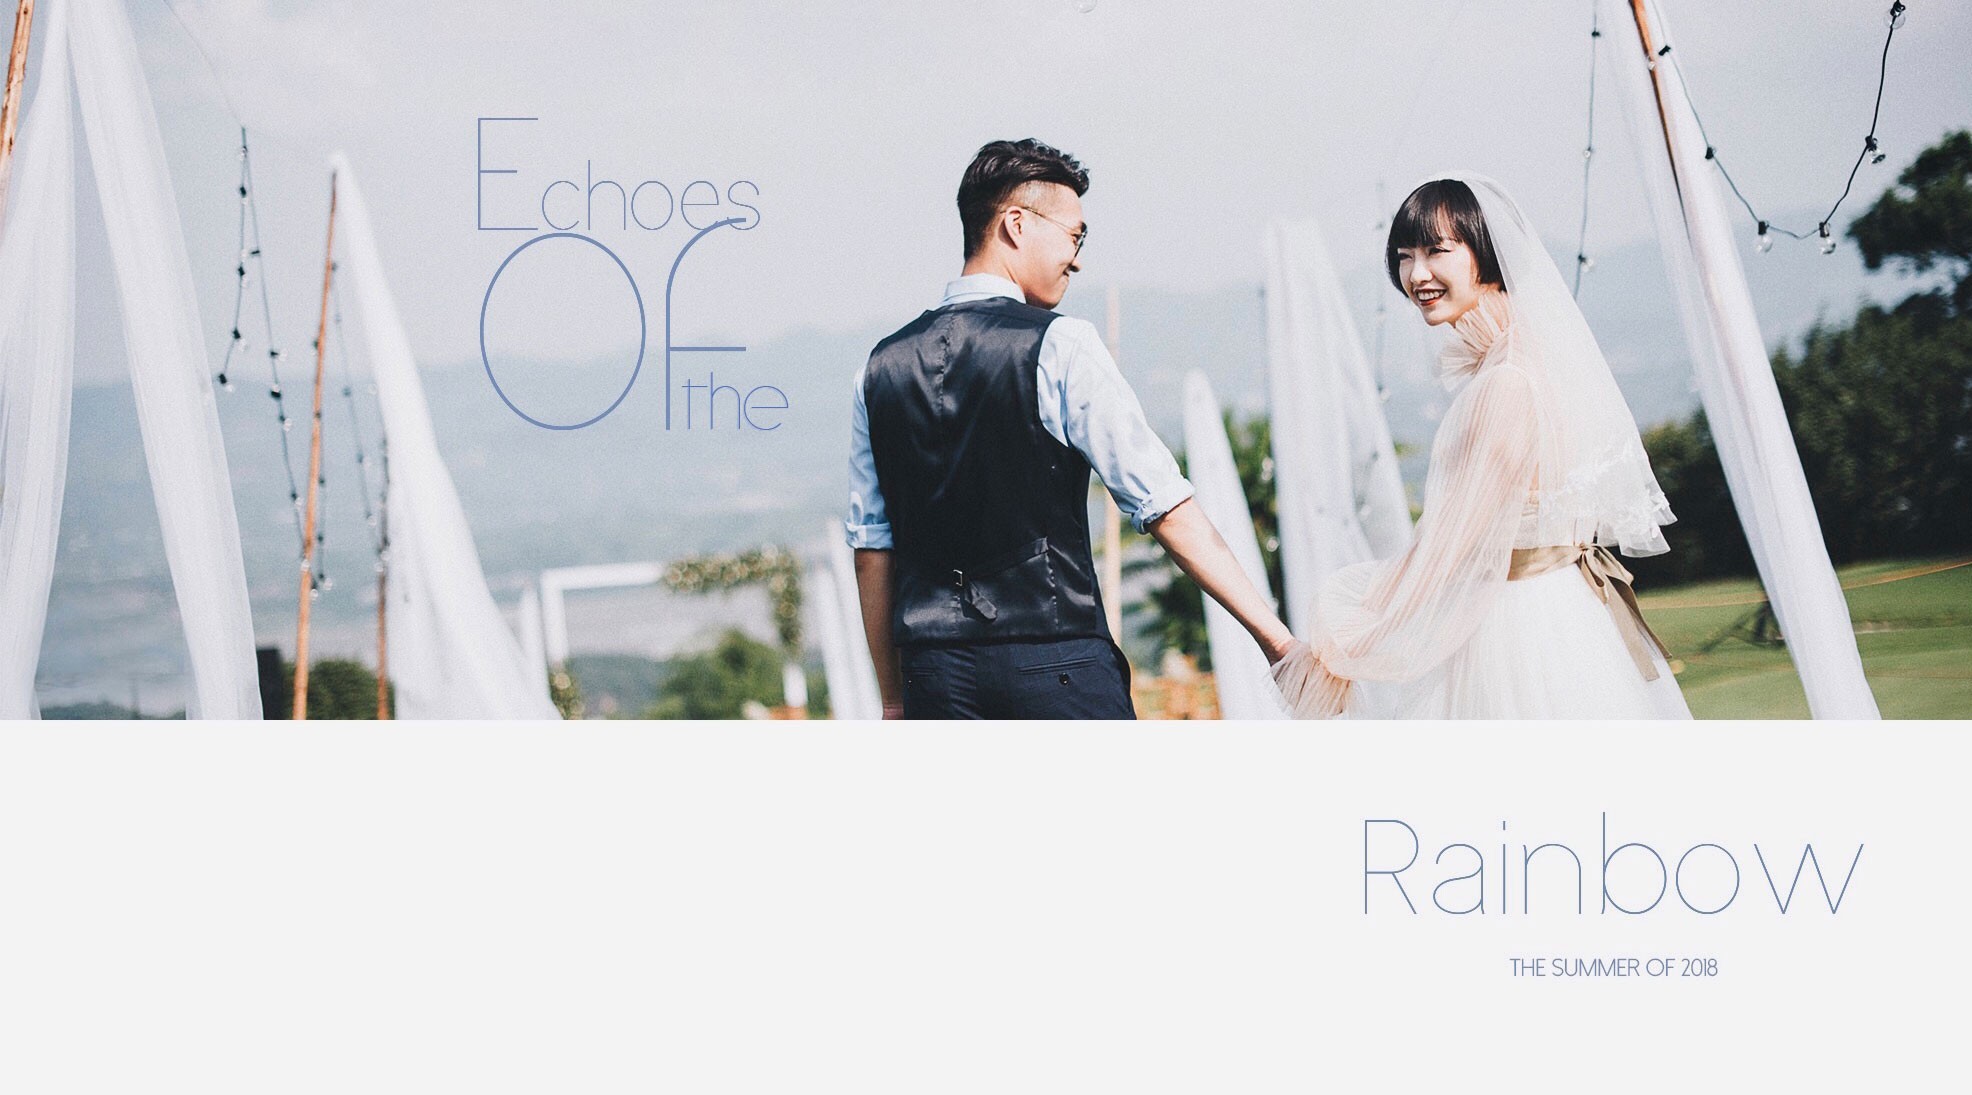 Echoes Of The Rainbow / 一日映画婚礼影片 